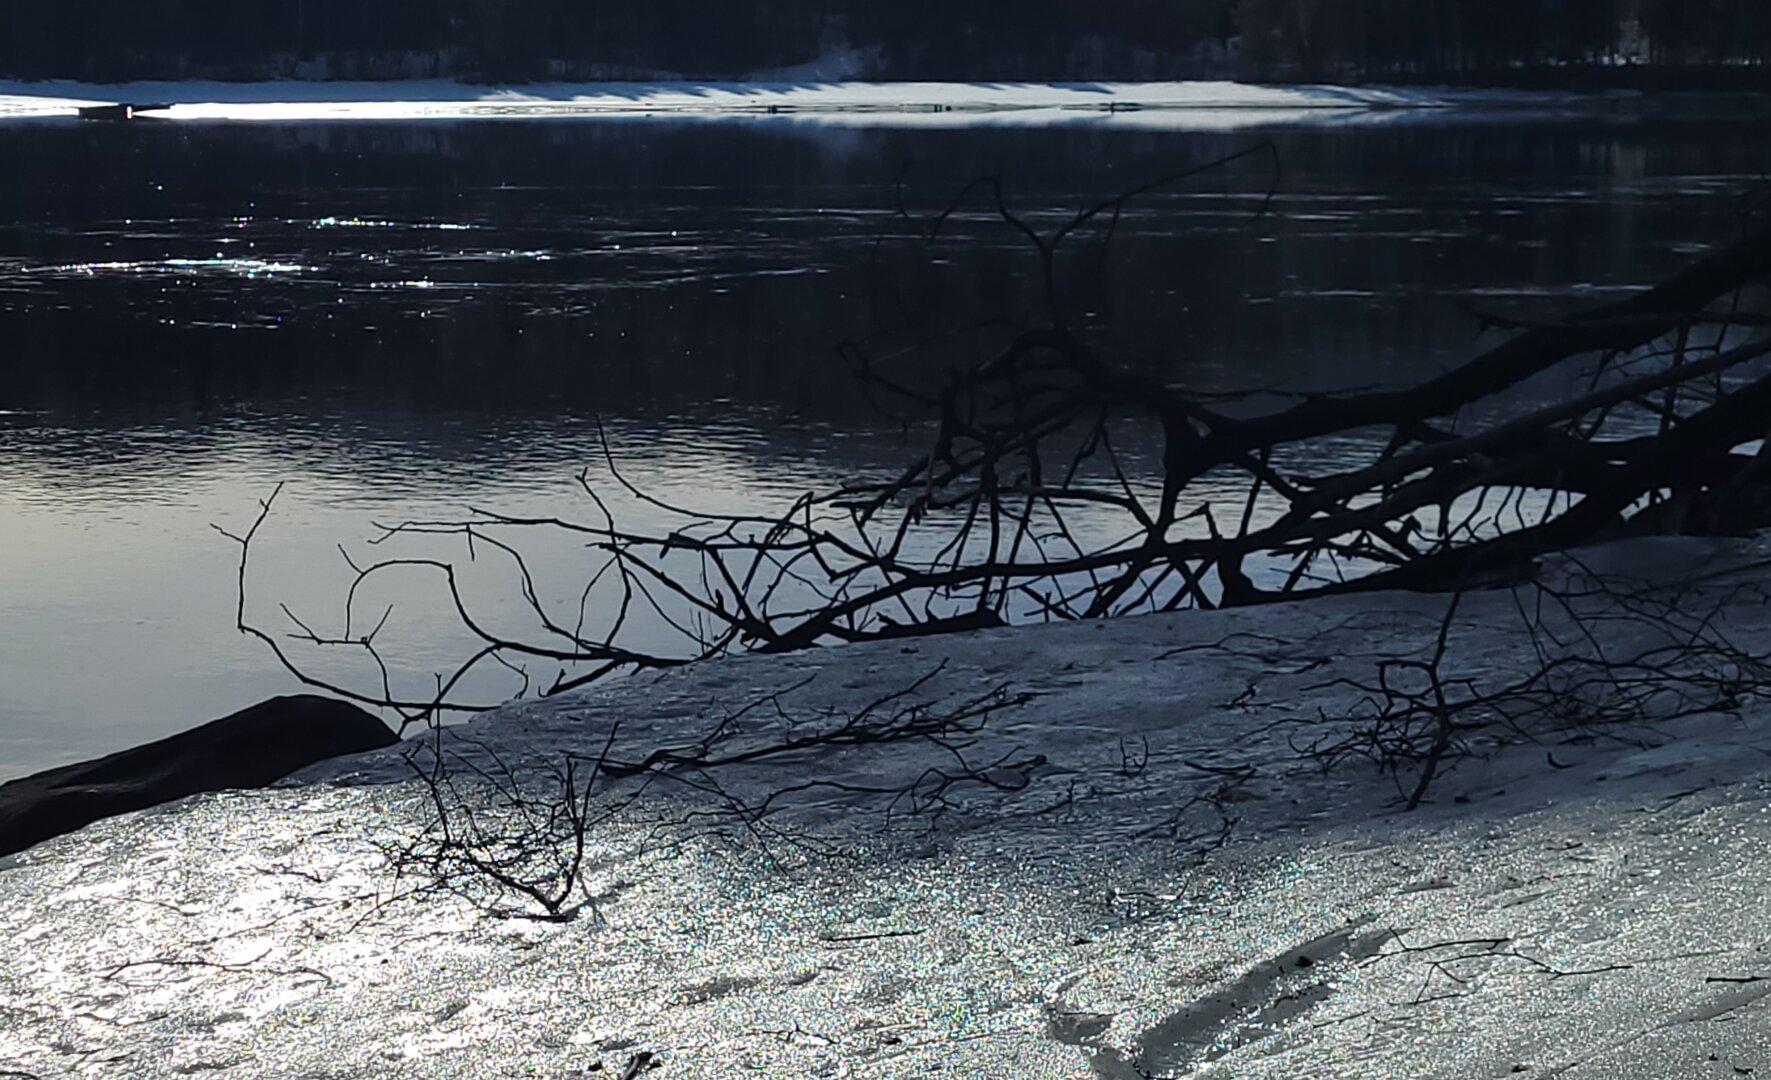 Picture taken against the sun. A shoreline of a river with glistening snow and a dead tree, looking black as it's lying in the shadows of other trees outside the picture. The other riverbank is a white line between the dark trees on land and their reflection in the water, where the sun  is leaving small sparklers on the dark parts.